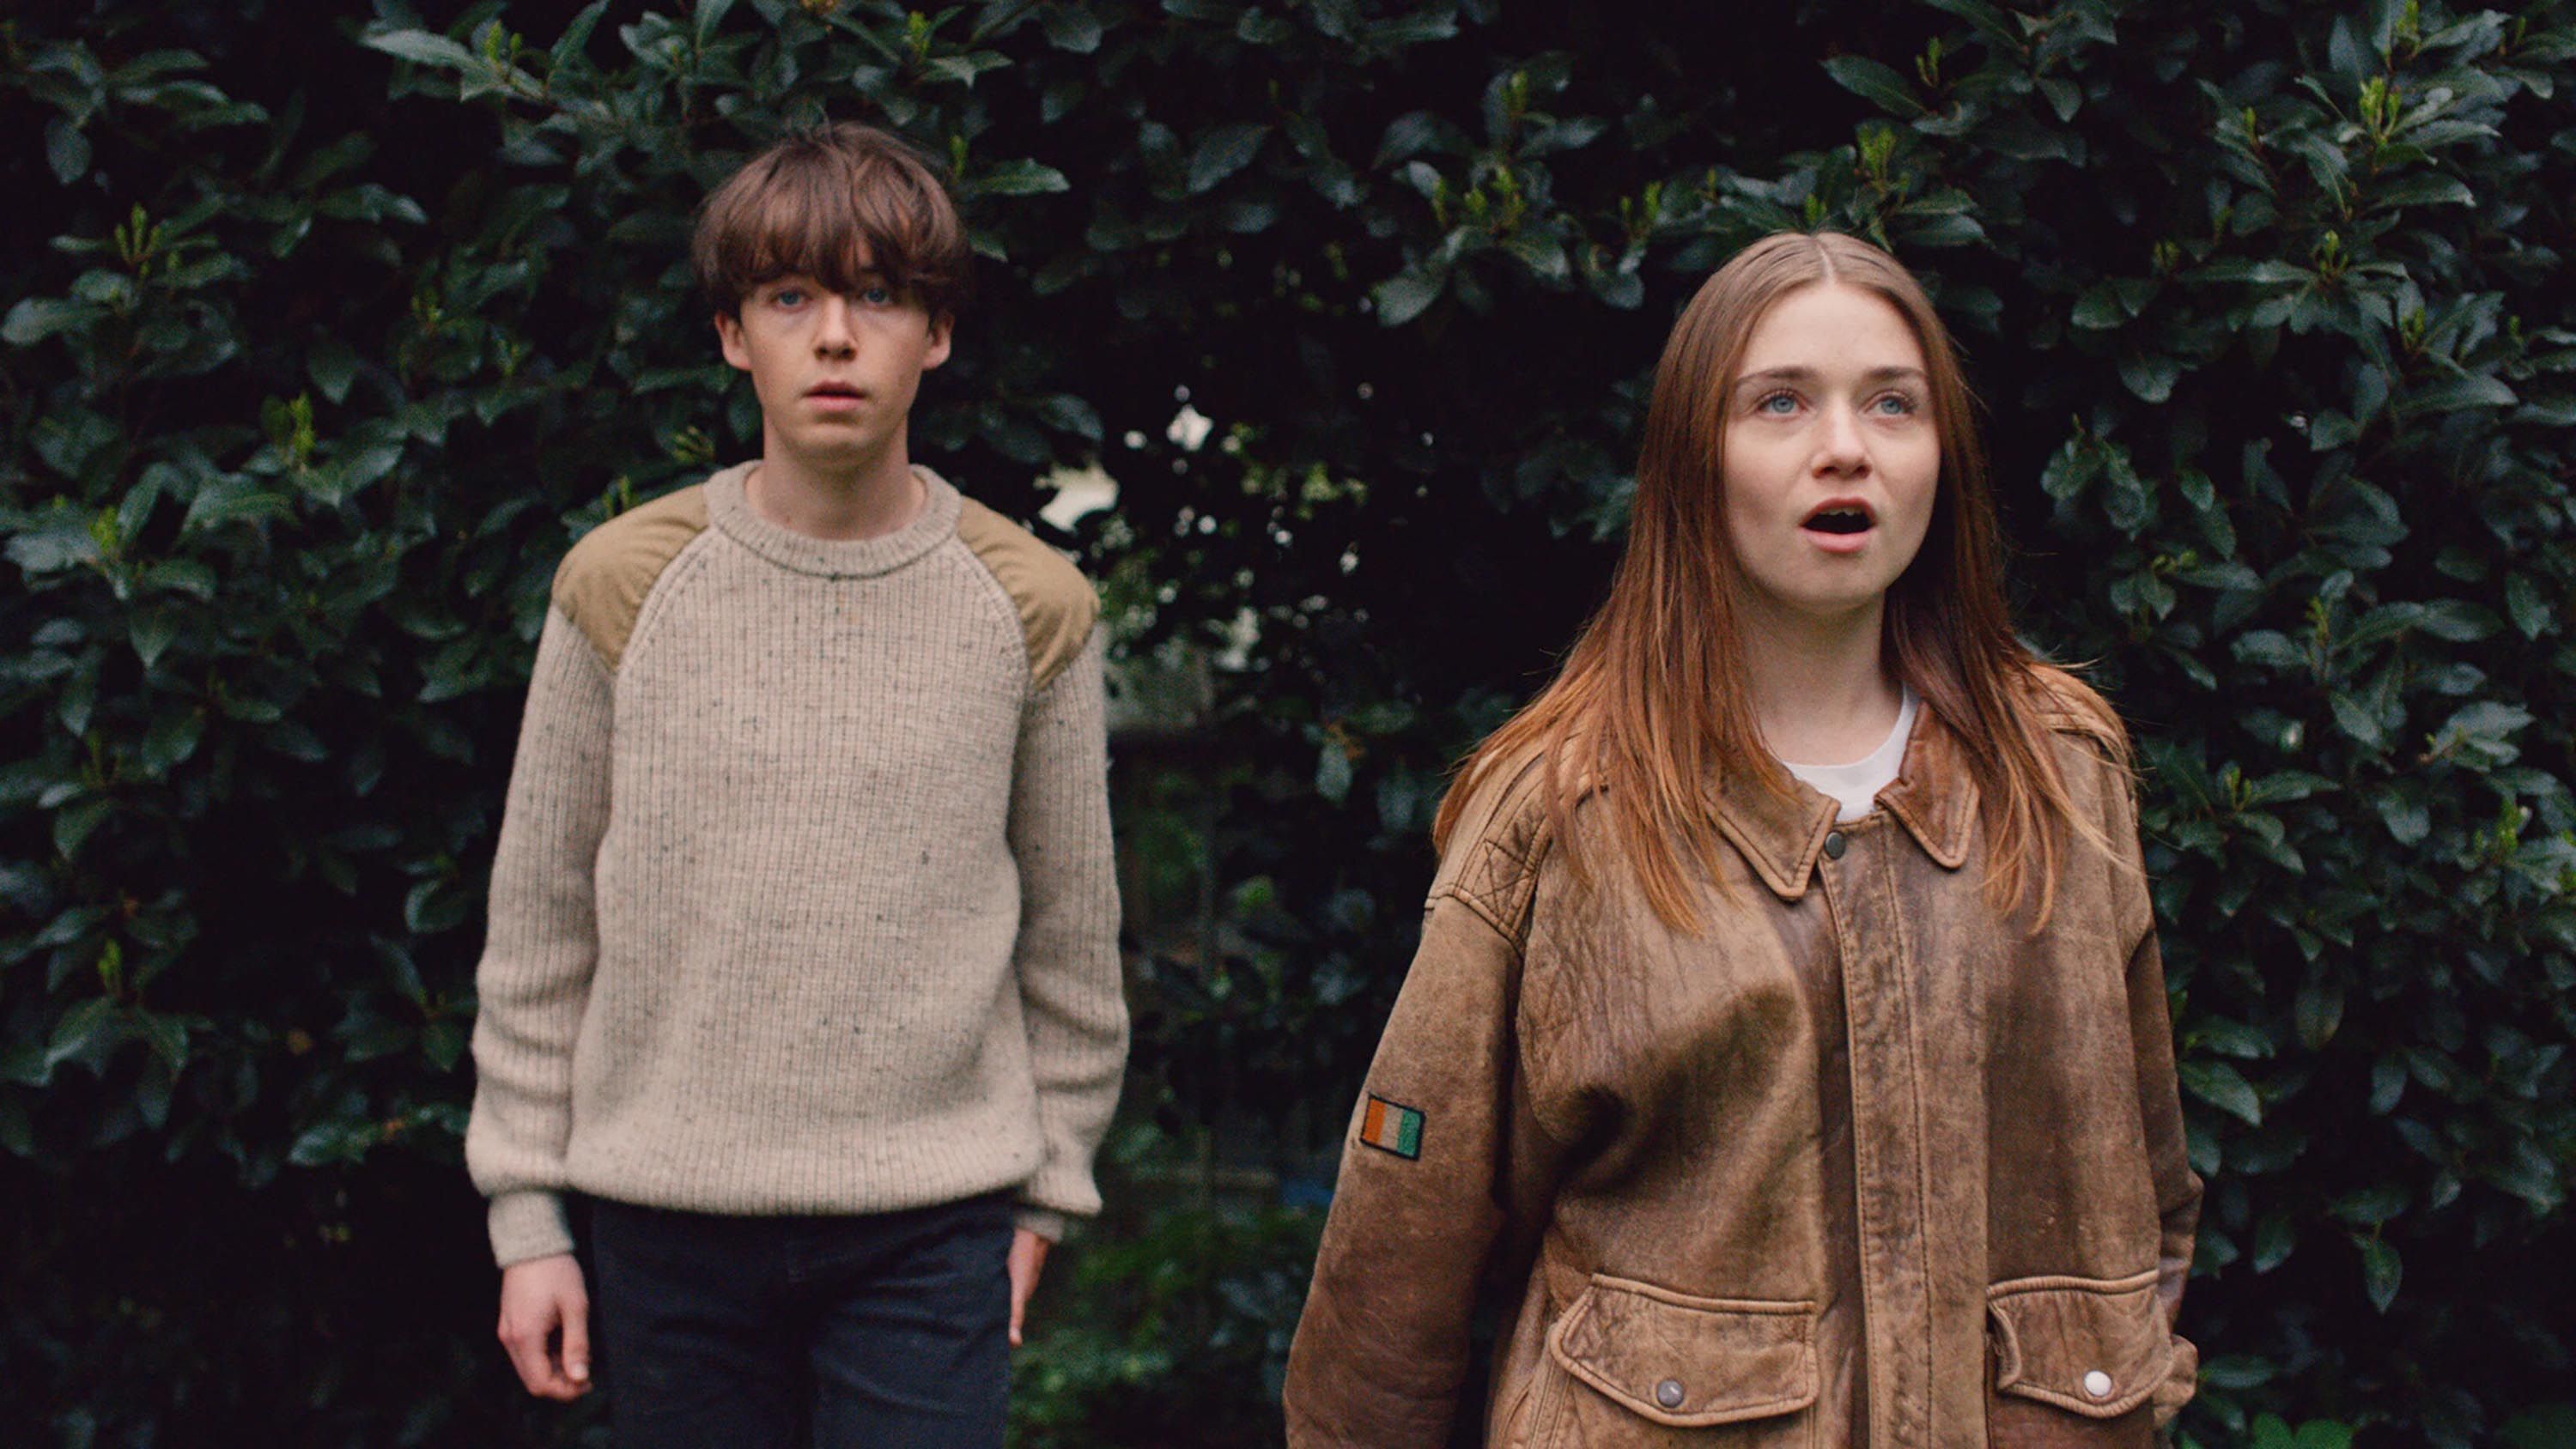 The End of the F***ing World